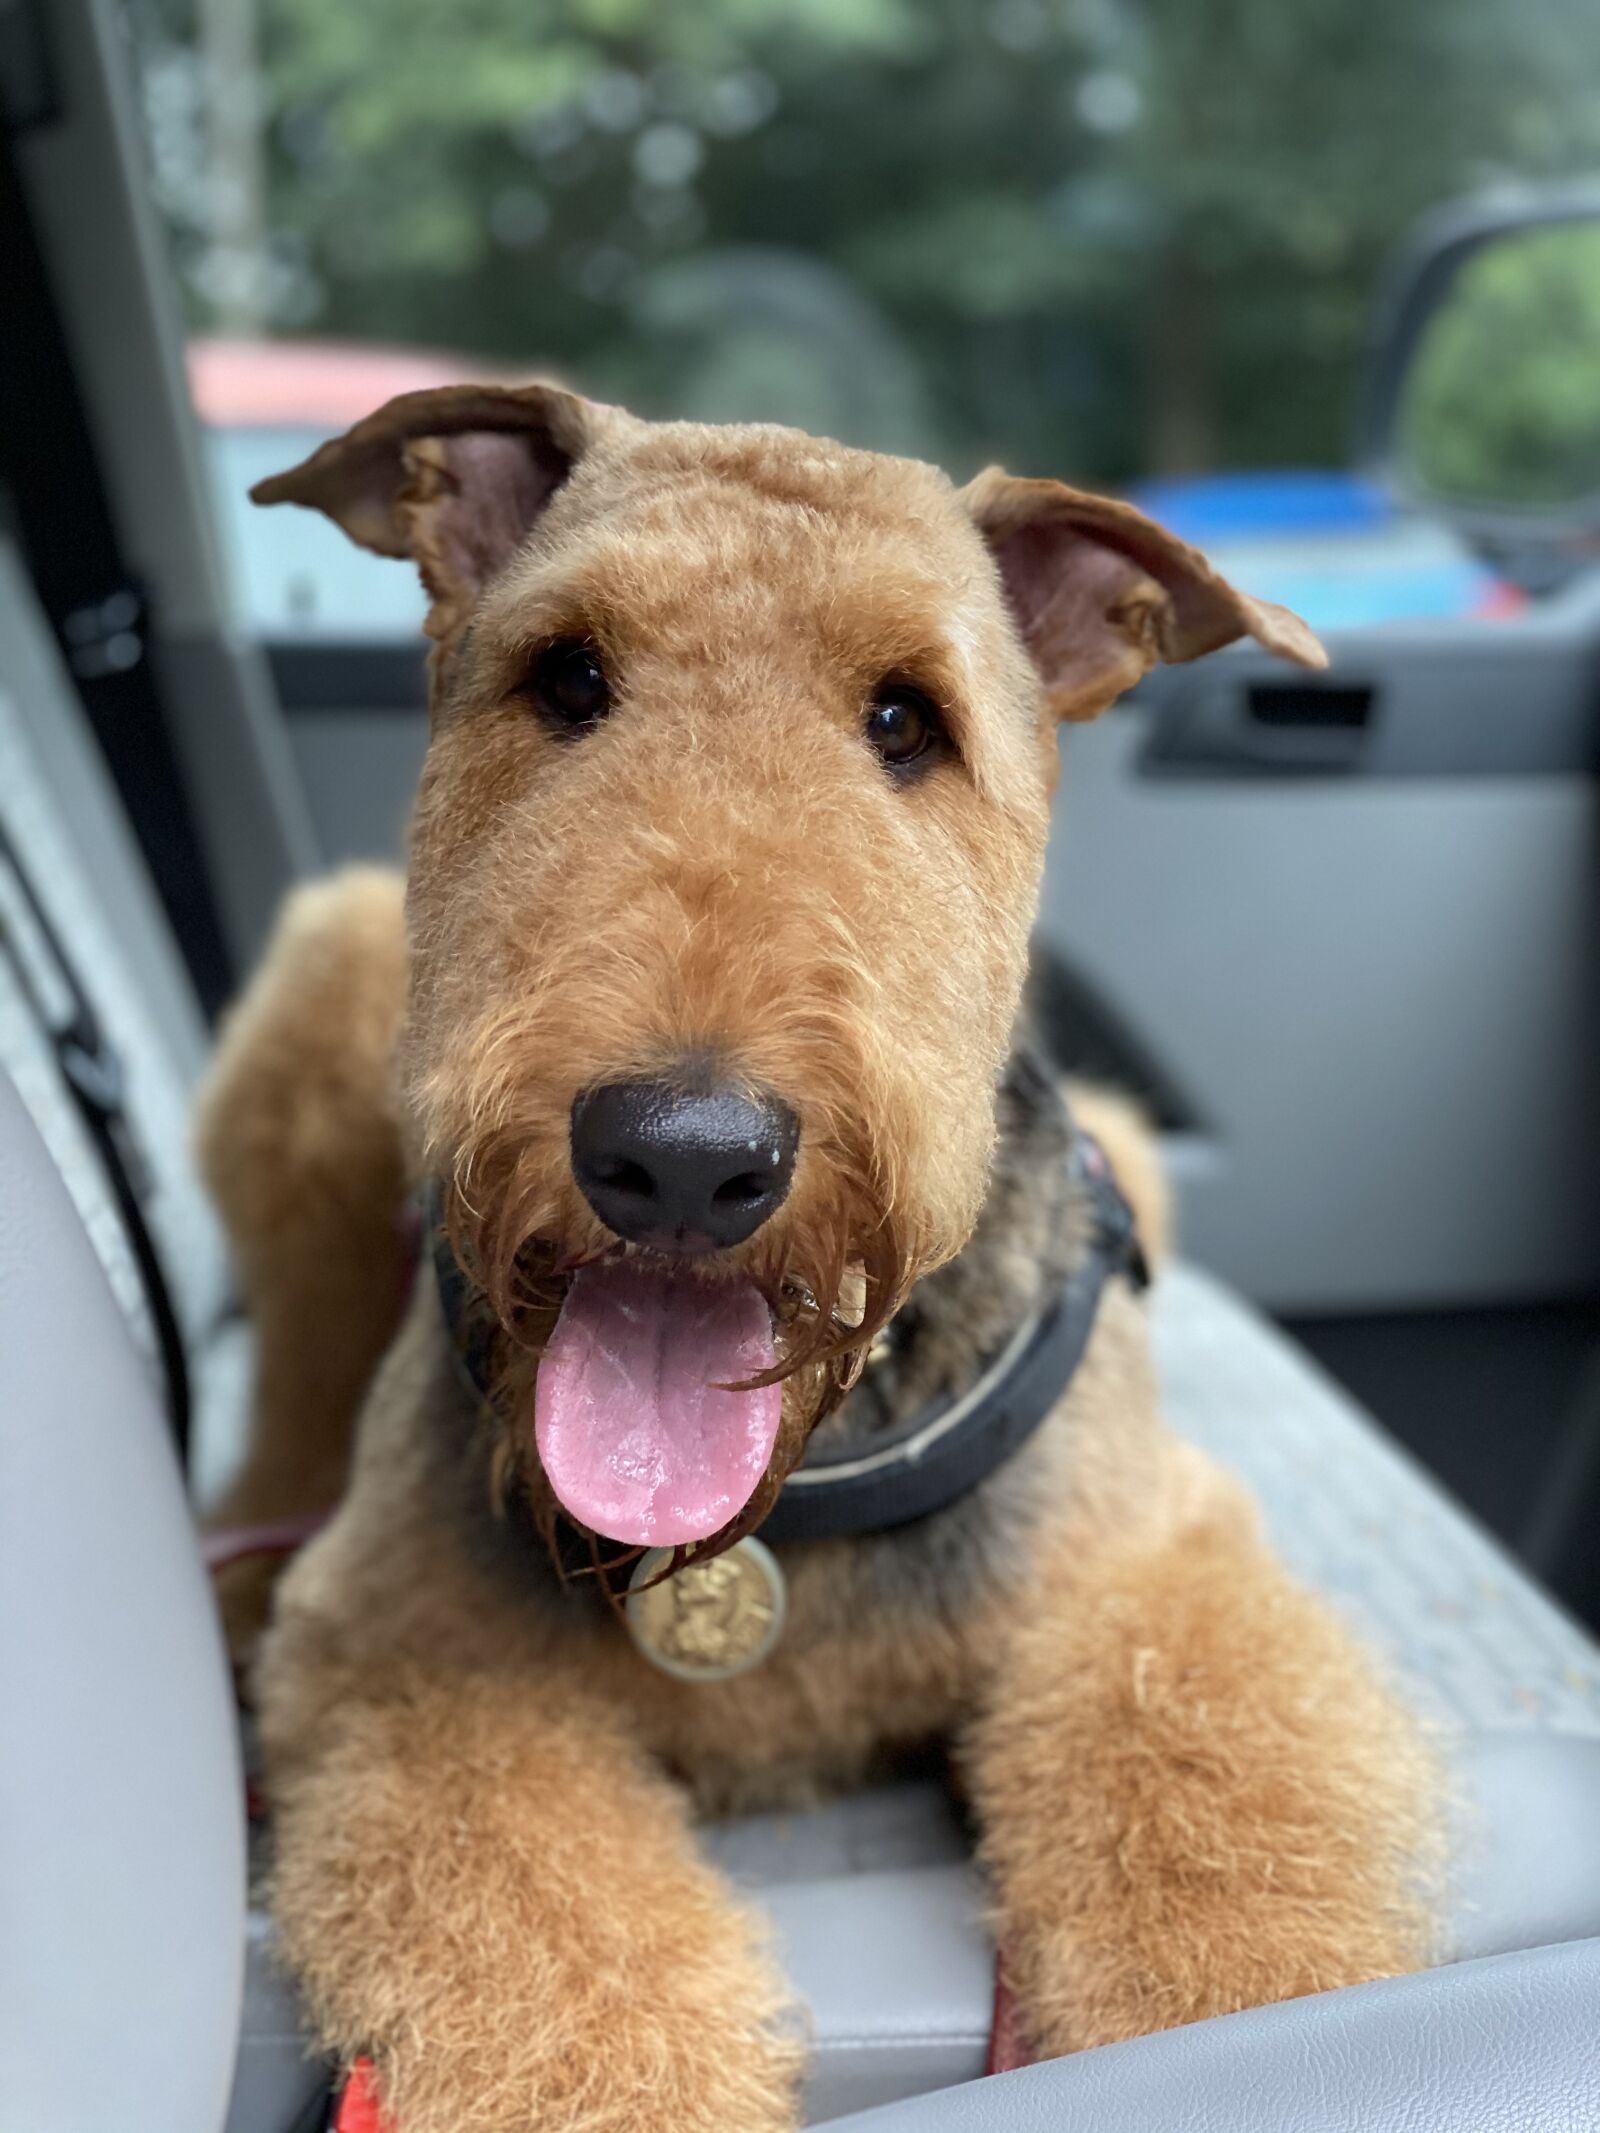 Apple iPhone 11 Pro + iPhone 11 Pro back dual camera 6mm f/2 sample photo. Airedale, terrier, charlie photography